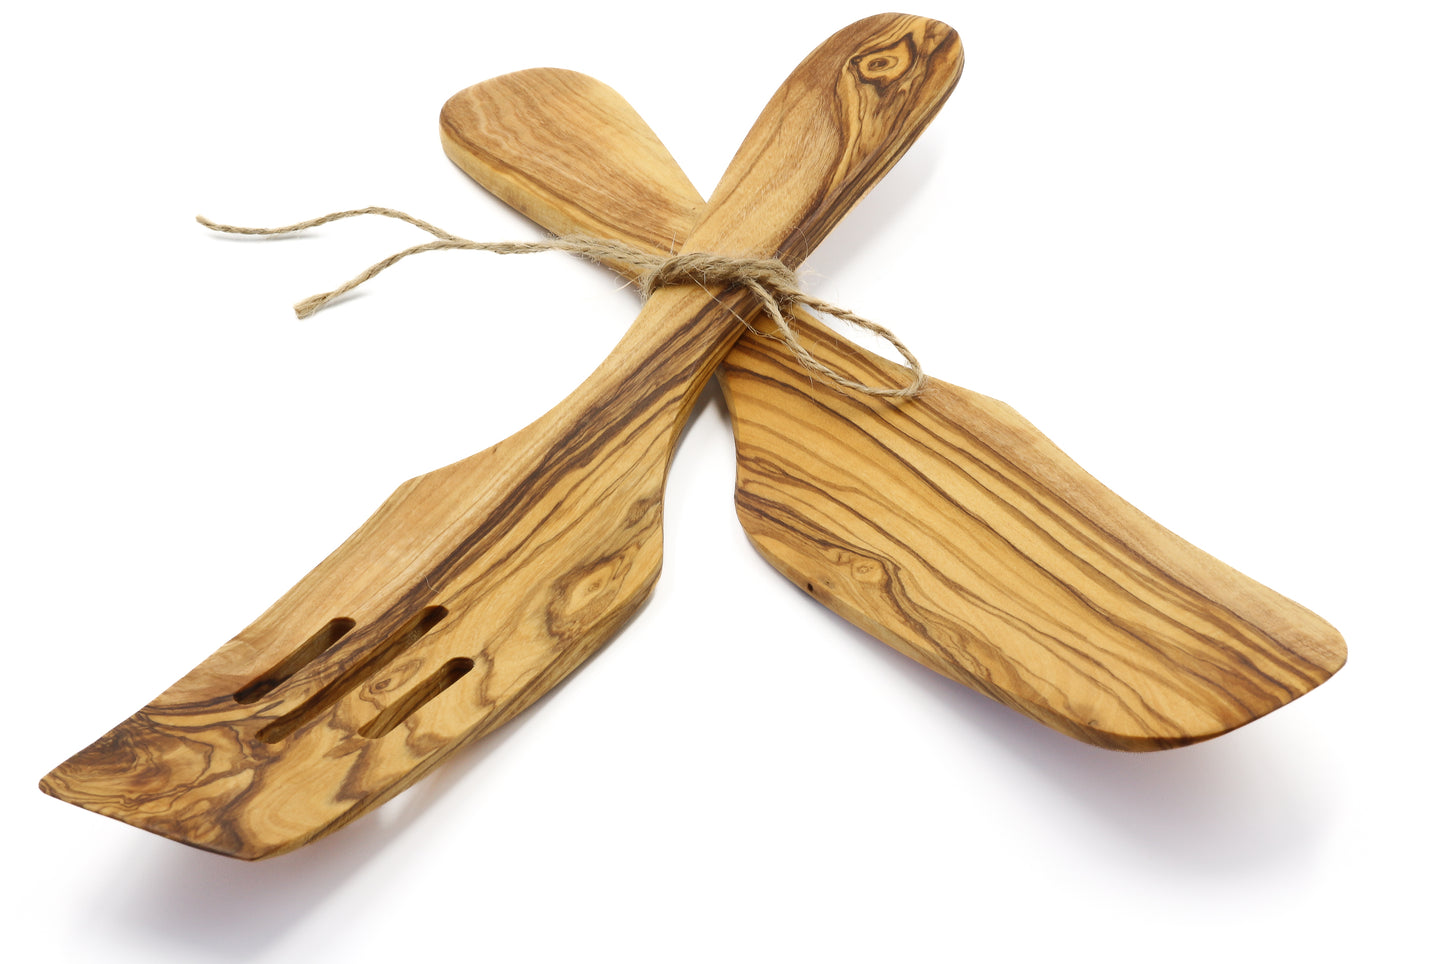 Olive wood utensil with a gracefully curved design